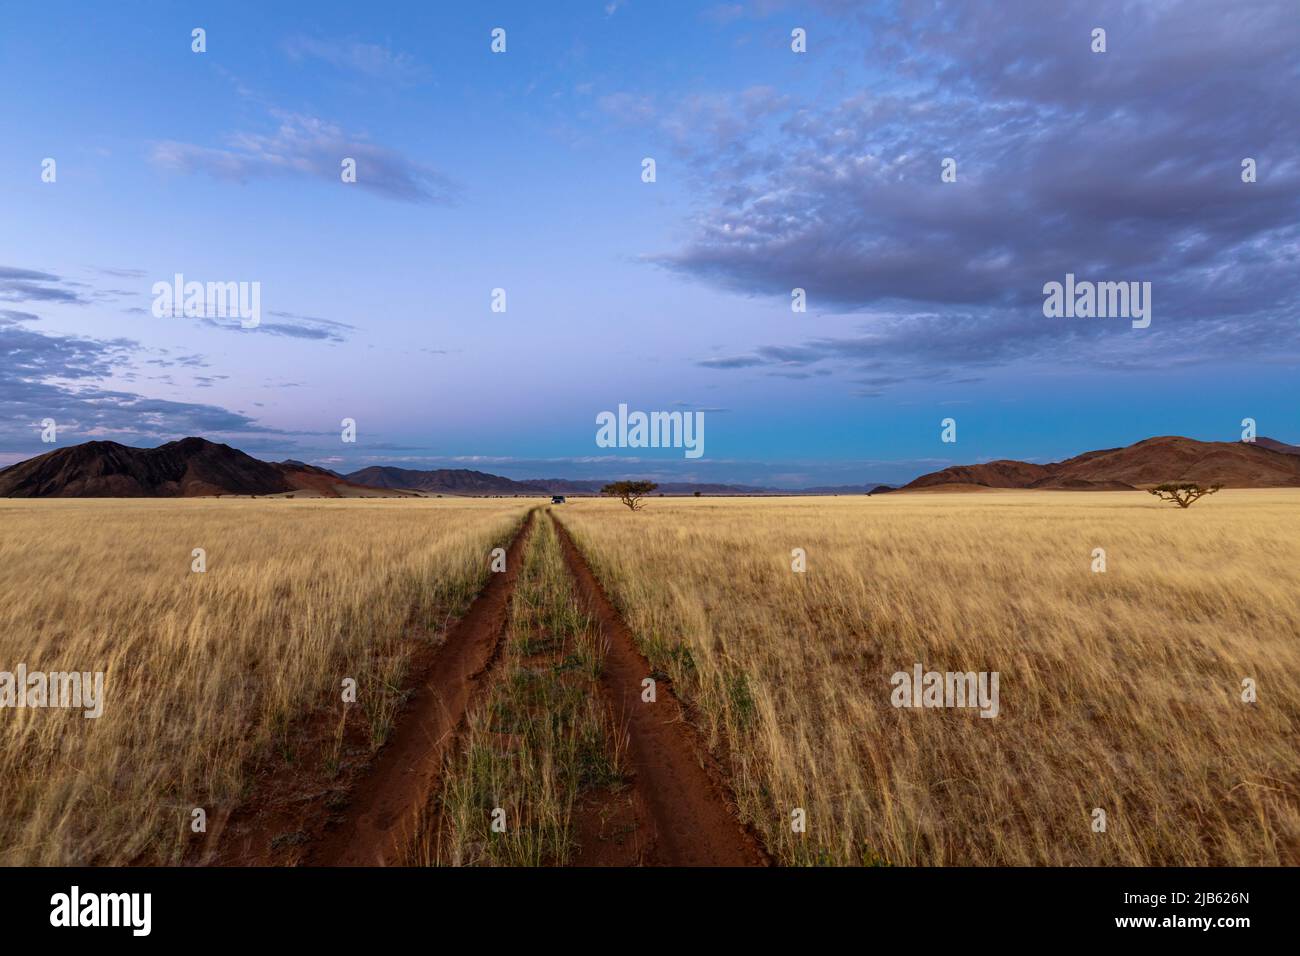 Sand tracks in dry grass under blue sky after sunset Namibia Stock Photo